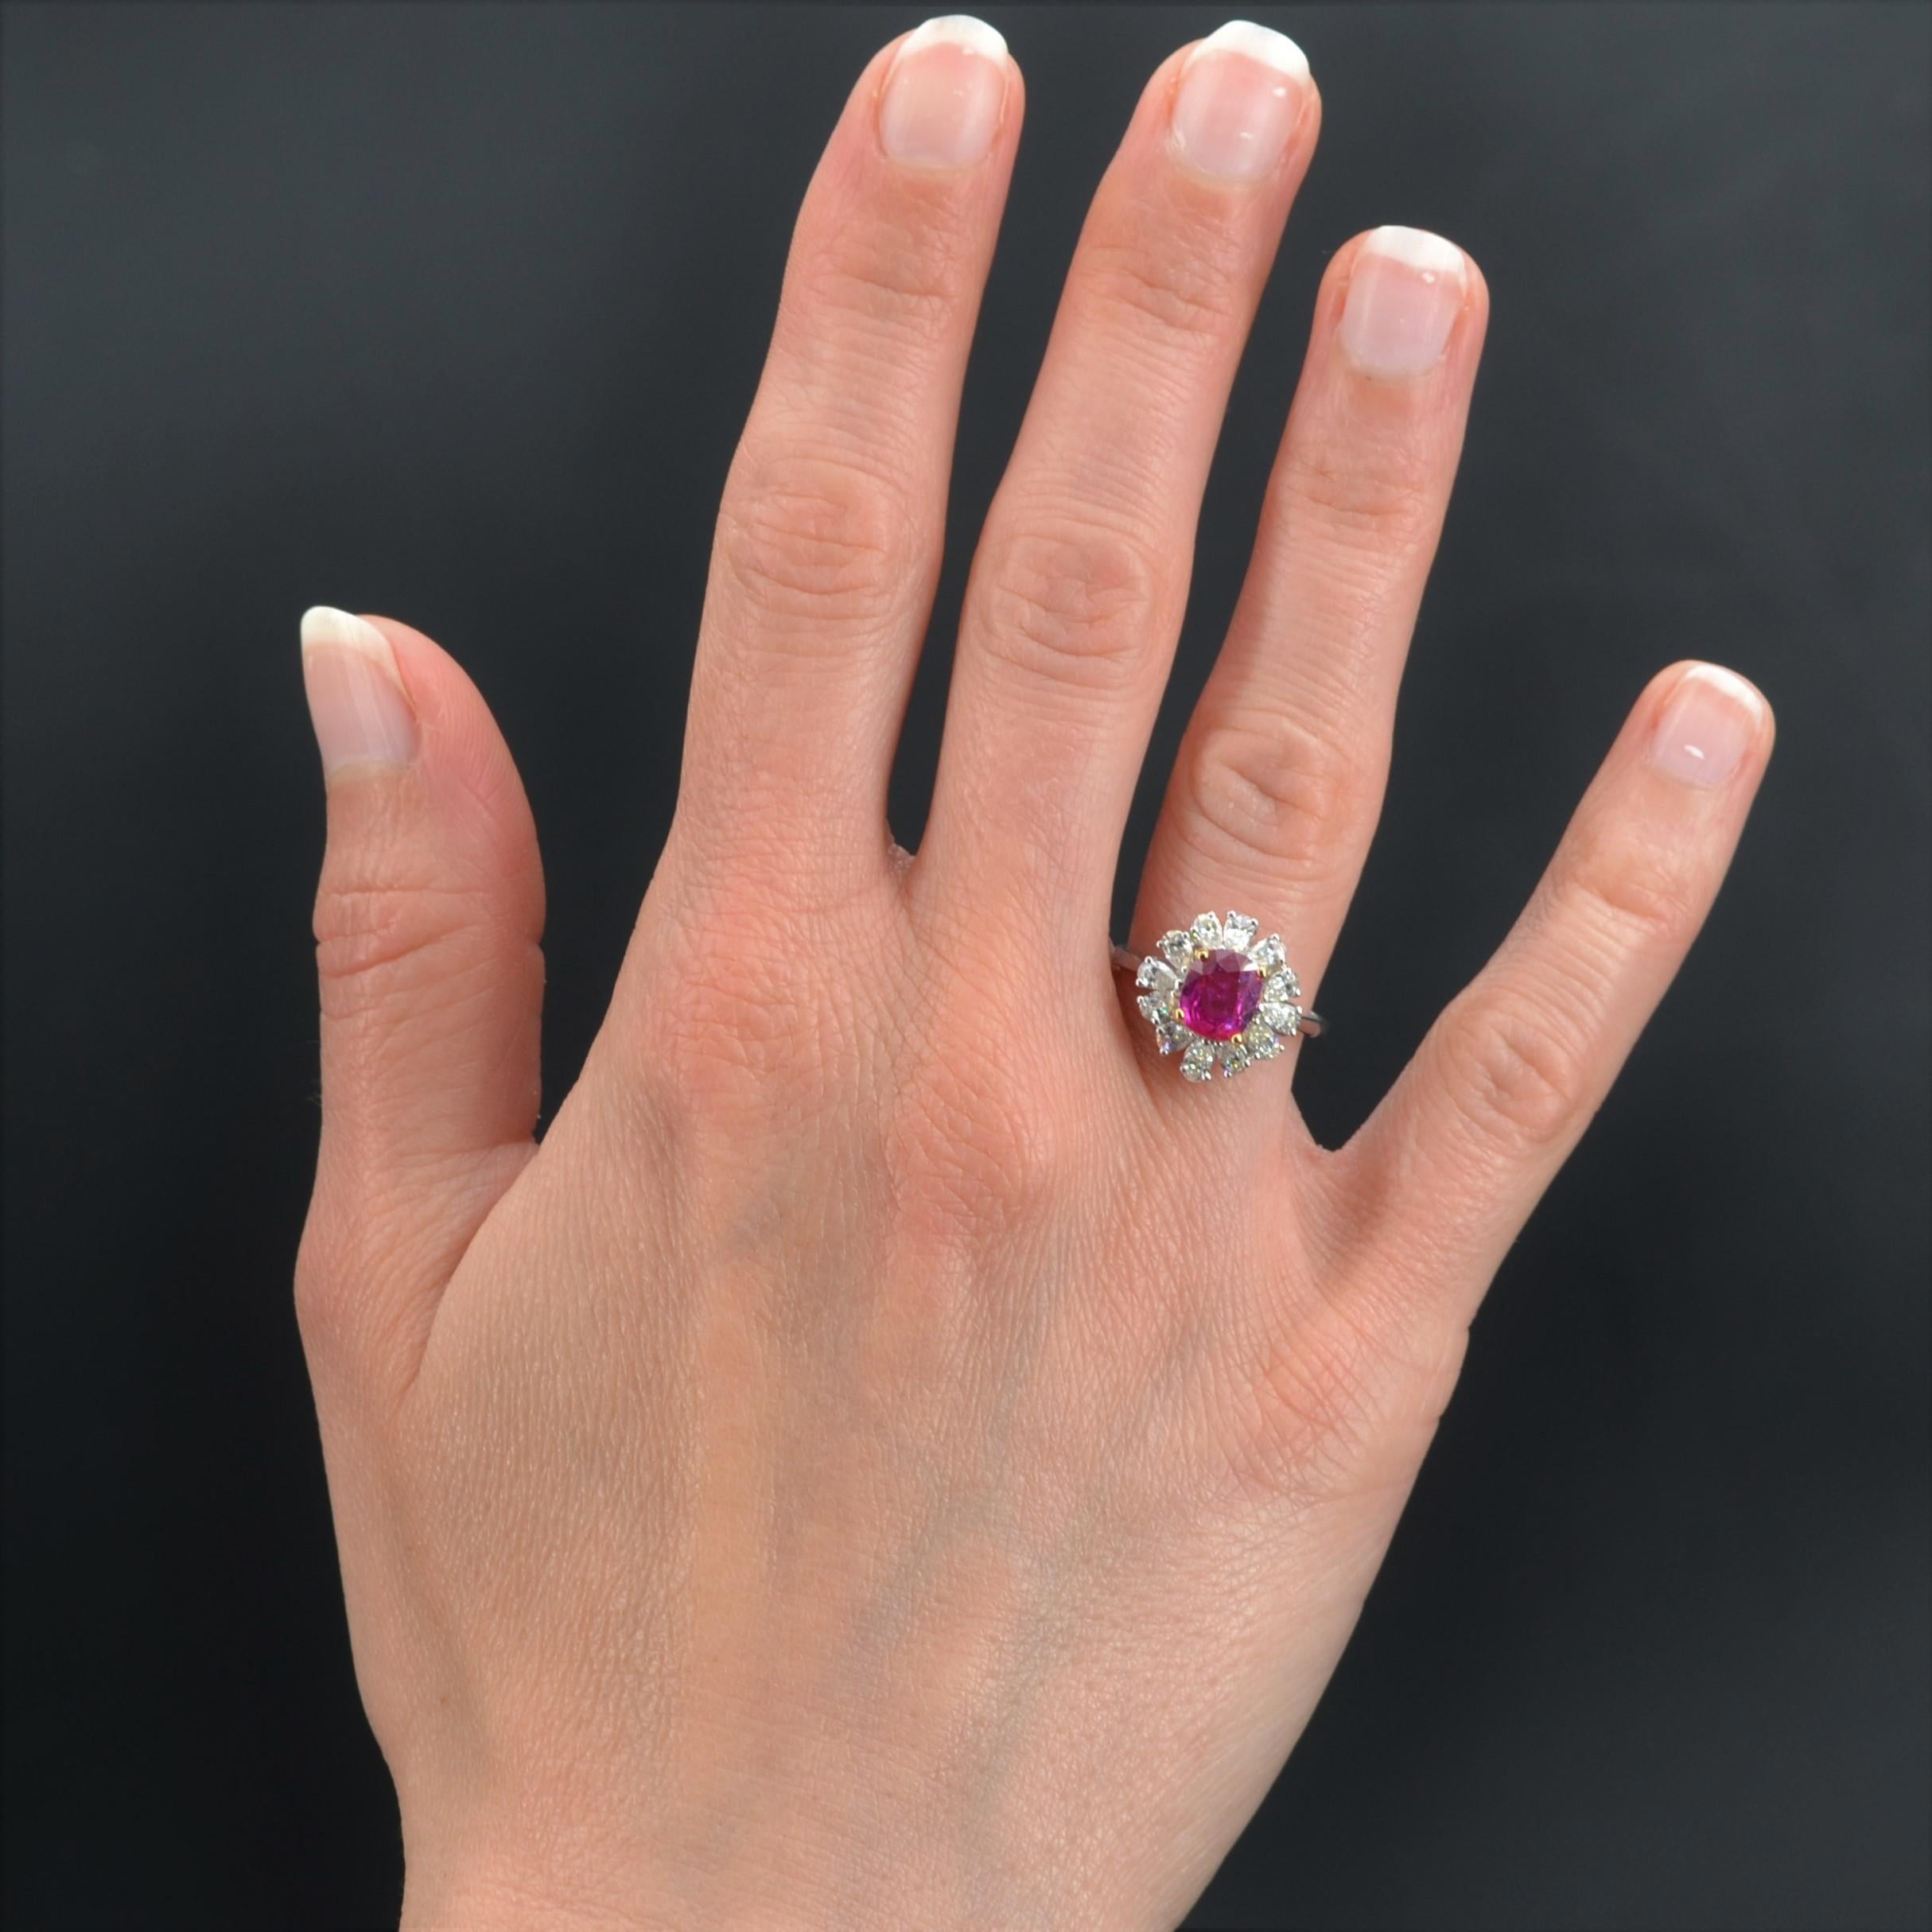 Ring in 18 karat white gold, eagle head hallmark.
Feminine flower ring, it is set with claws of yellow gold on its top of a cushion-cut rose sapphire, in a surround of pear-cut diamonds, also set with claws. The basket is made of gold wire.
Weight